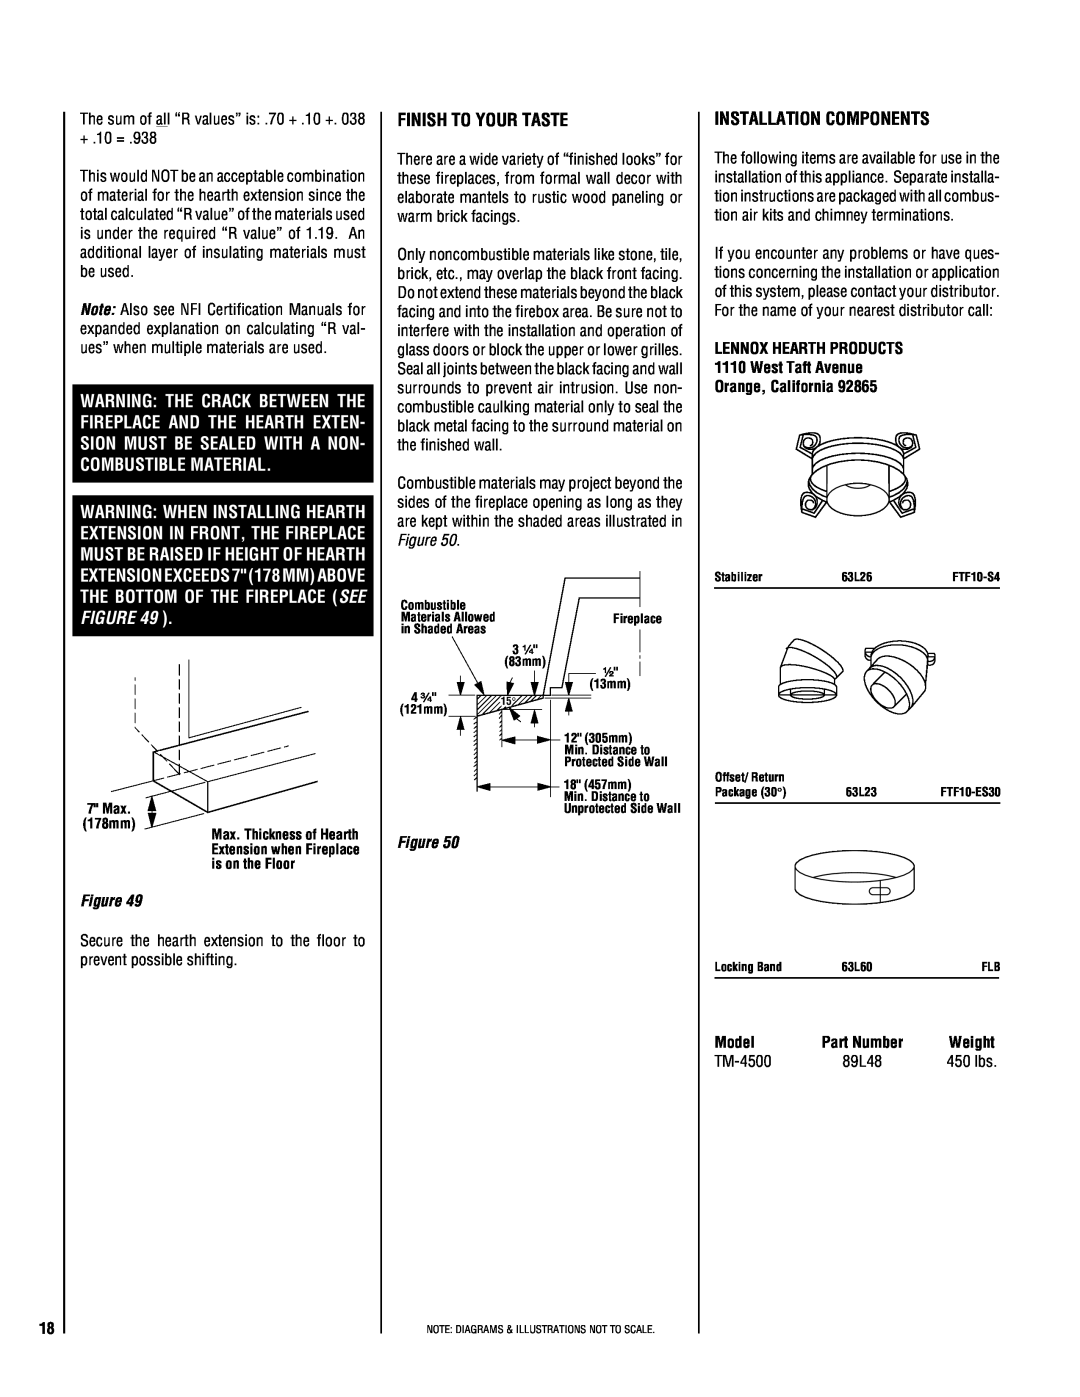 Lucent Technologies TM-4500 installation instructions Finish To Your Taste, Installation Components 